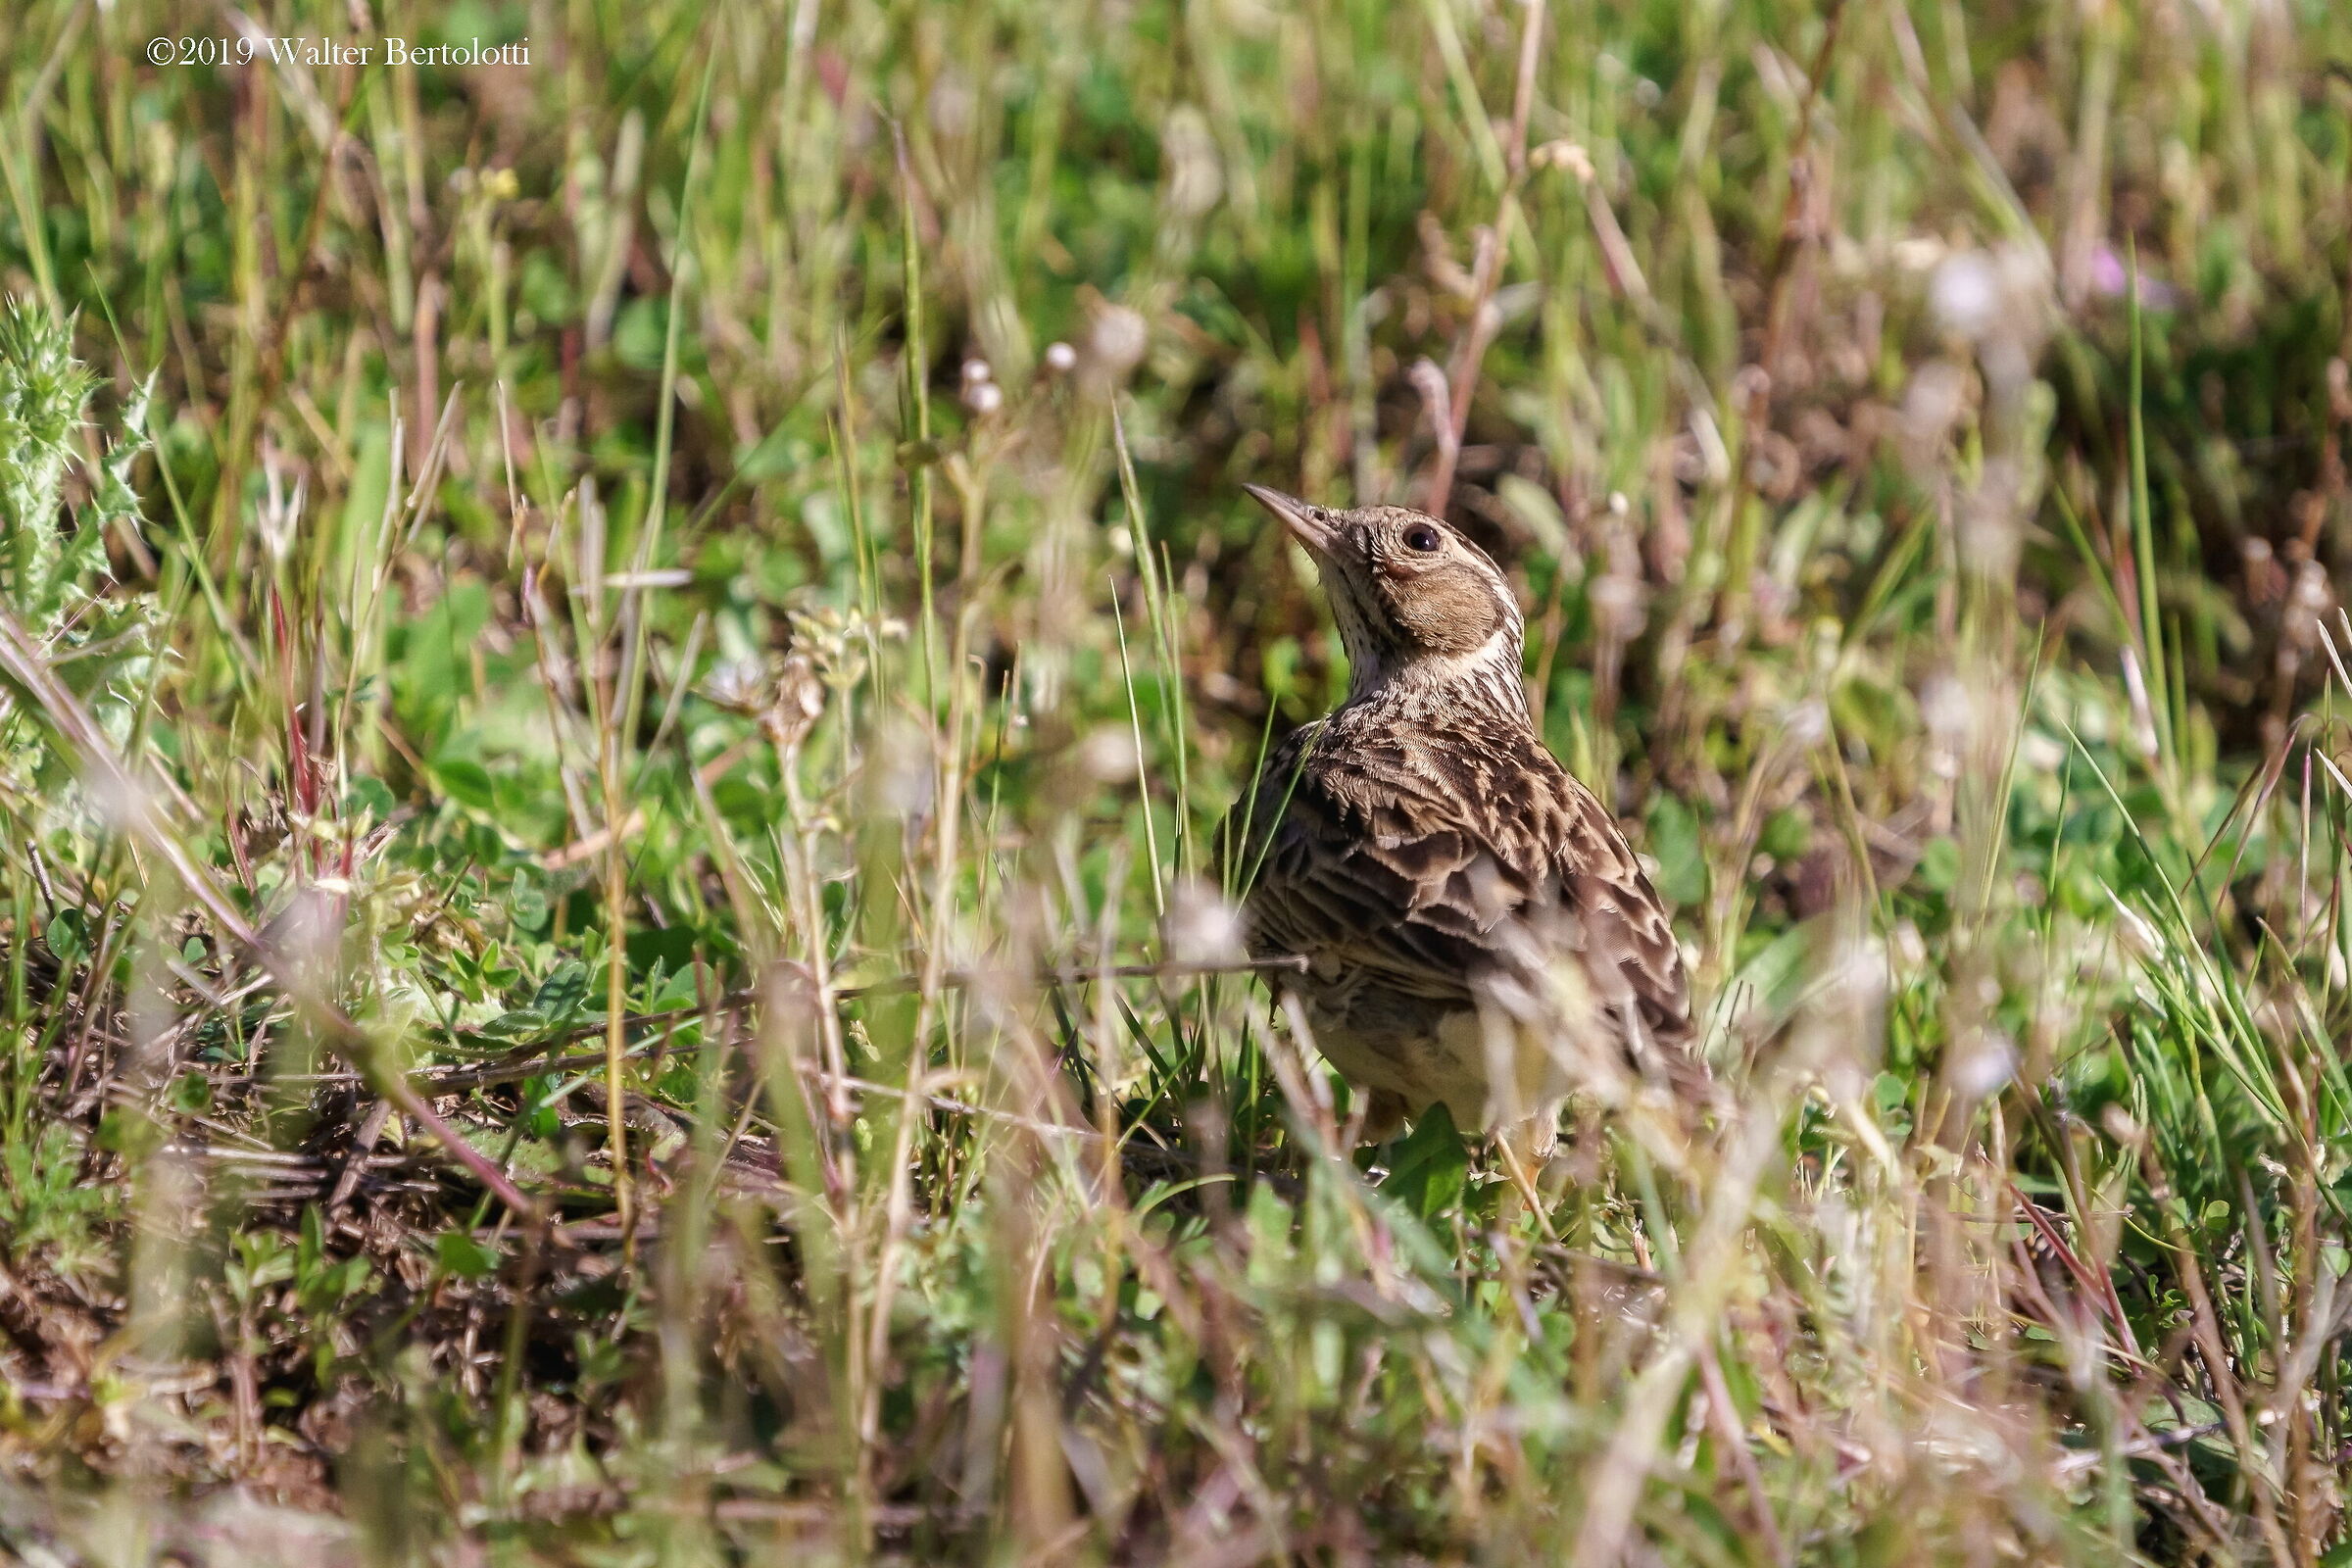 The attention of the Woodlark...